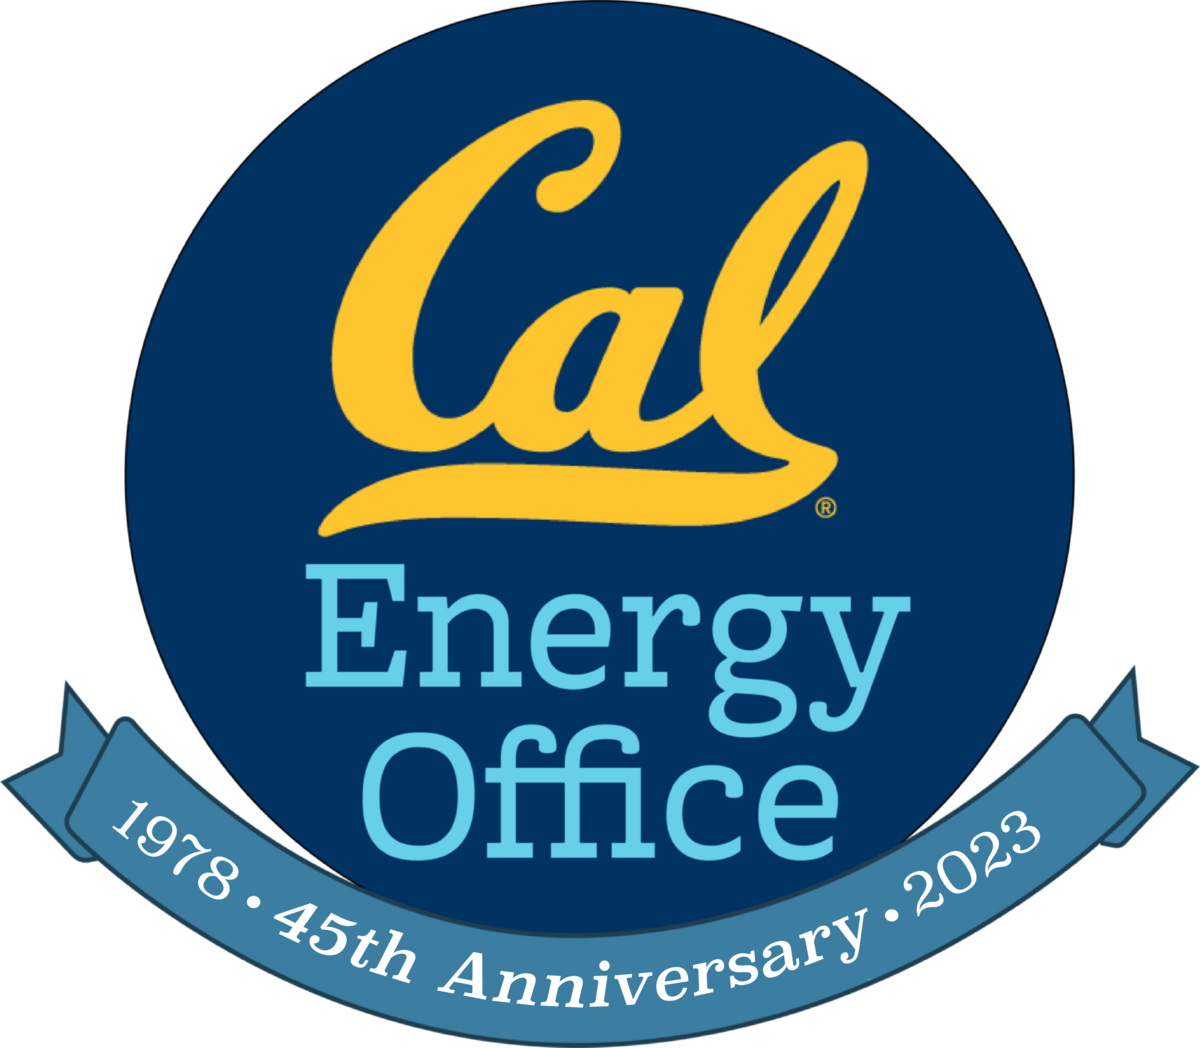 Energy Office 45th Anniversary Seal